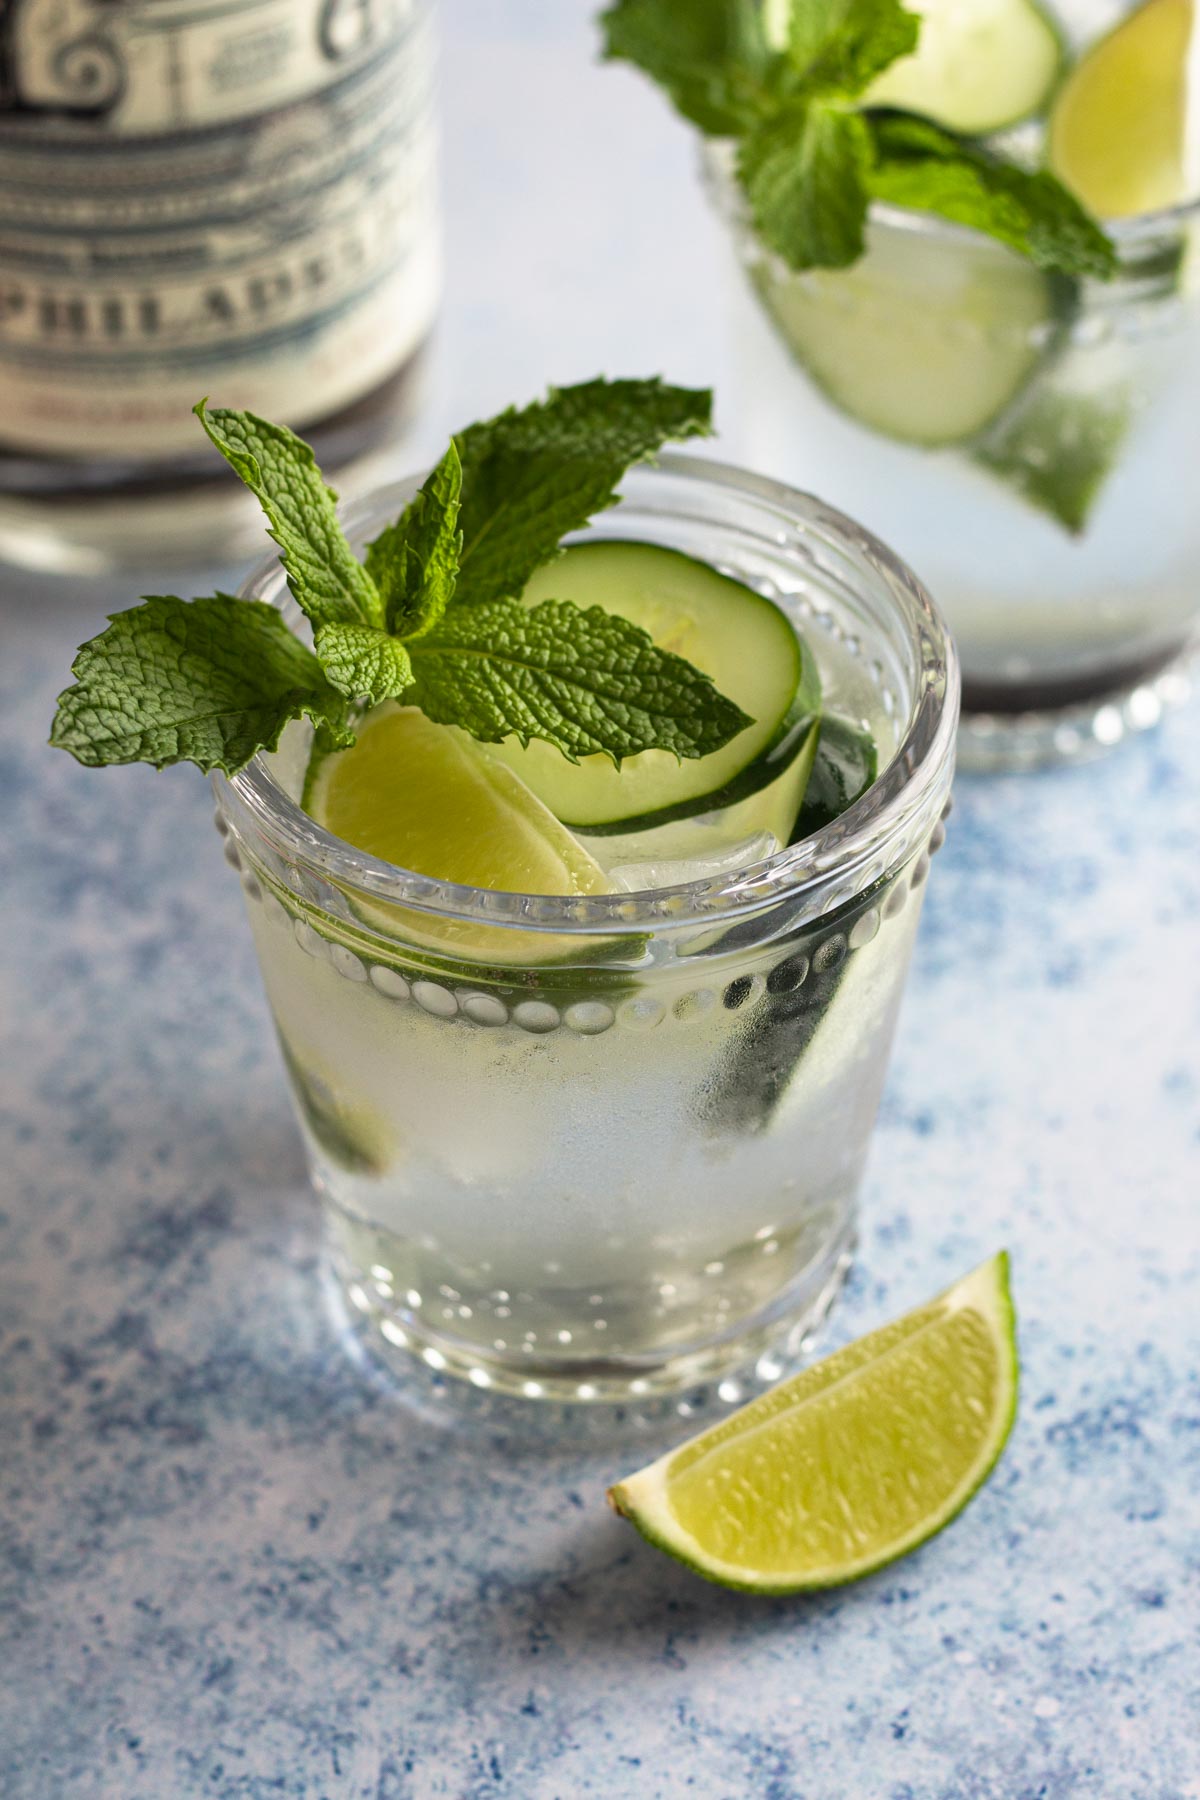 Gin and tonic garnished with a lime wedge, cucumber slices, and a sprig of mint.